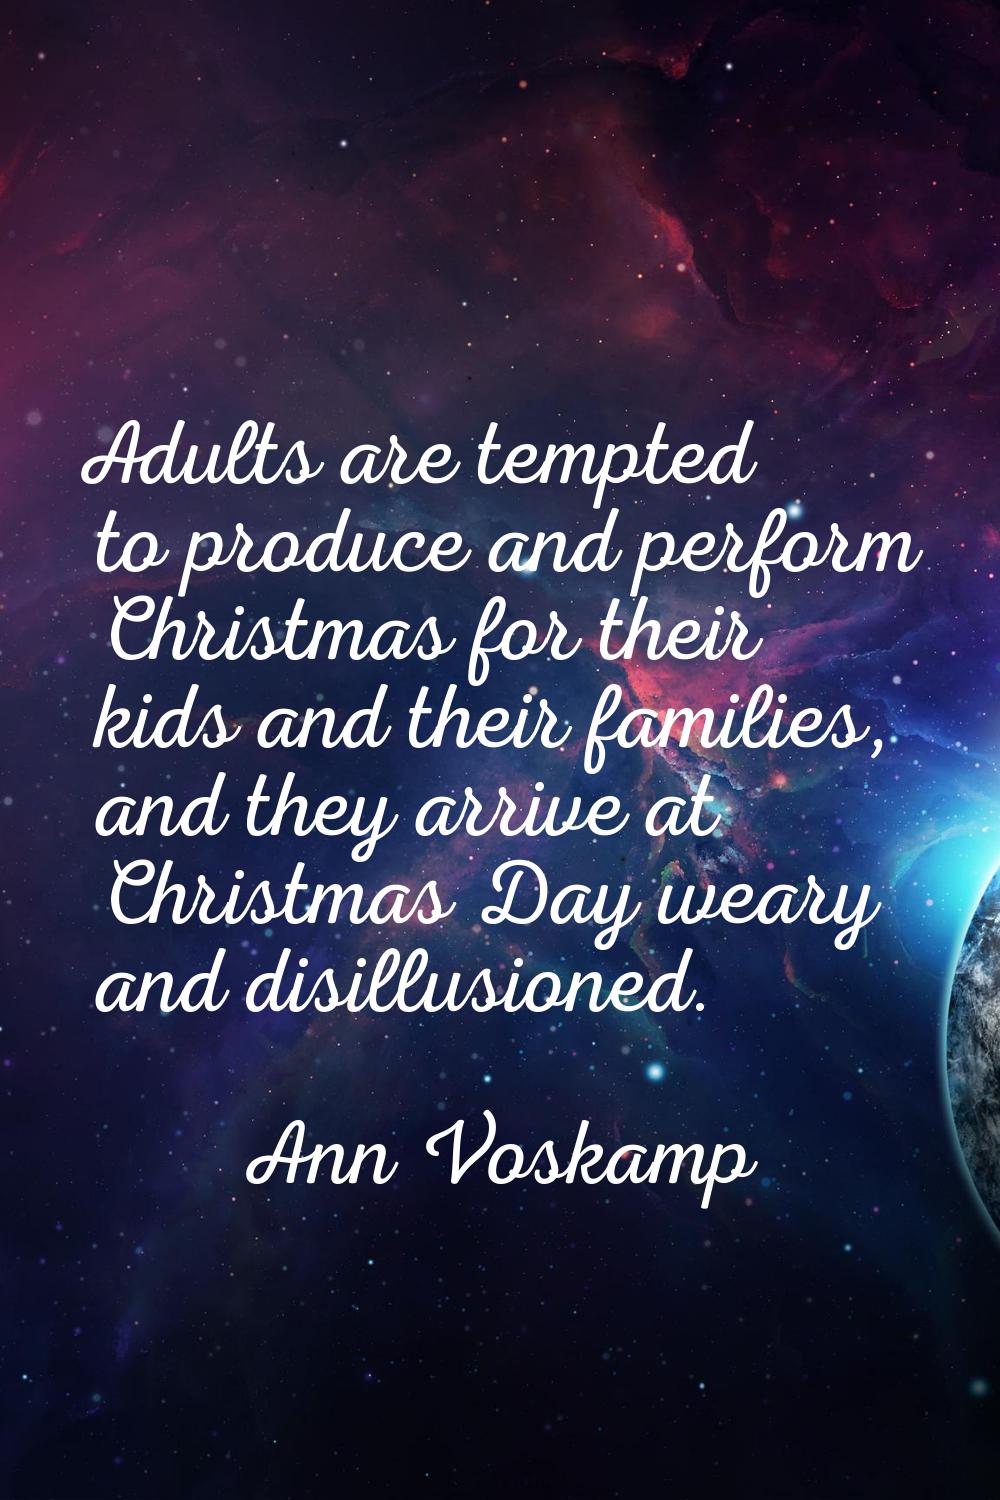 Adults are tempted to produce and perform Christmas for their kids and their families, and they arr